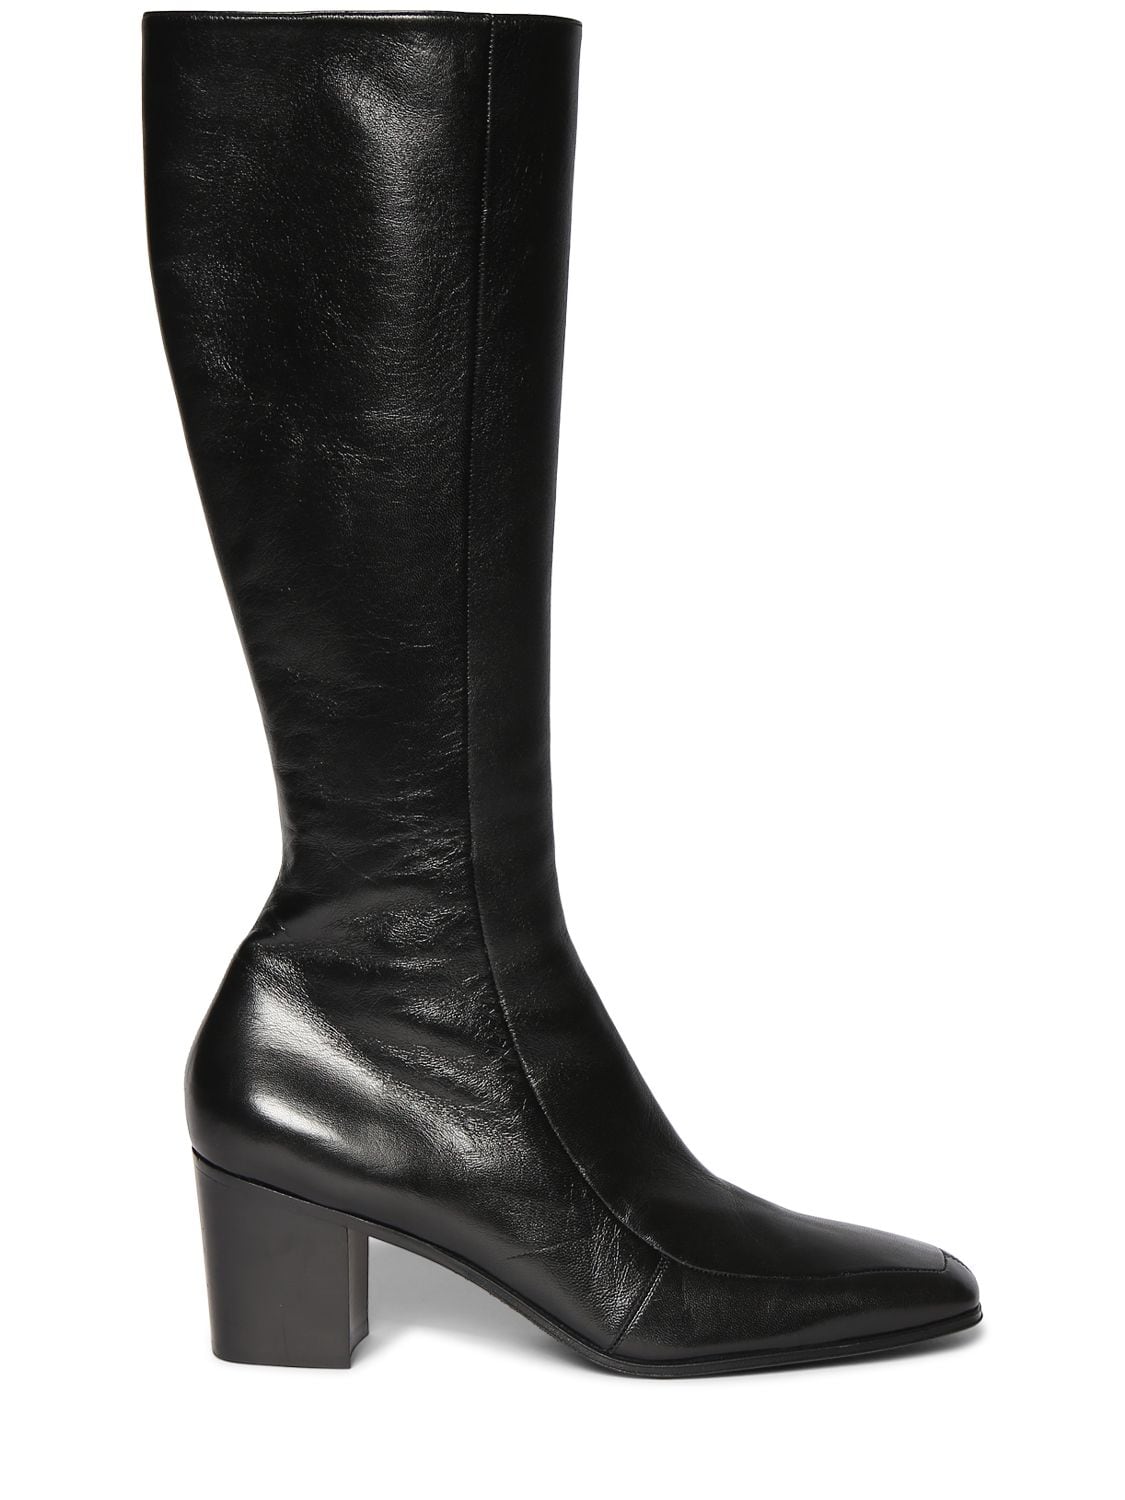 SAINT LAURENT 70MM OTTO ZIP-UP LEATHER TALL BOOTS